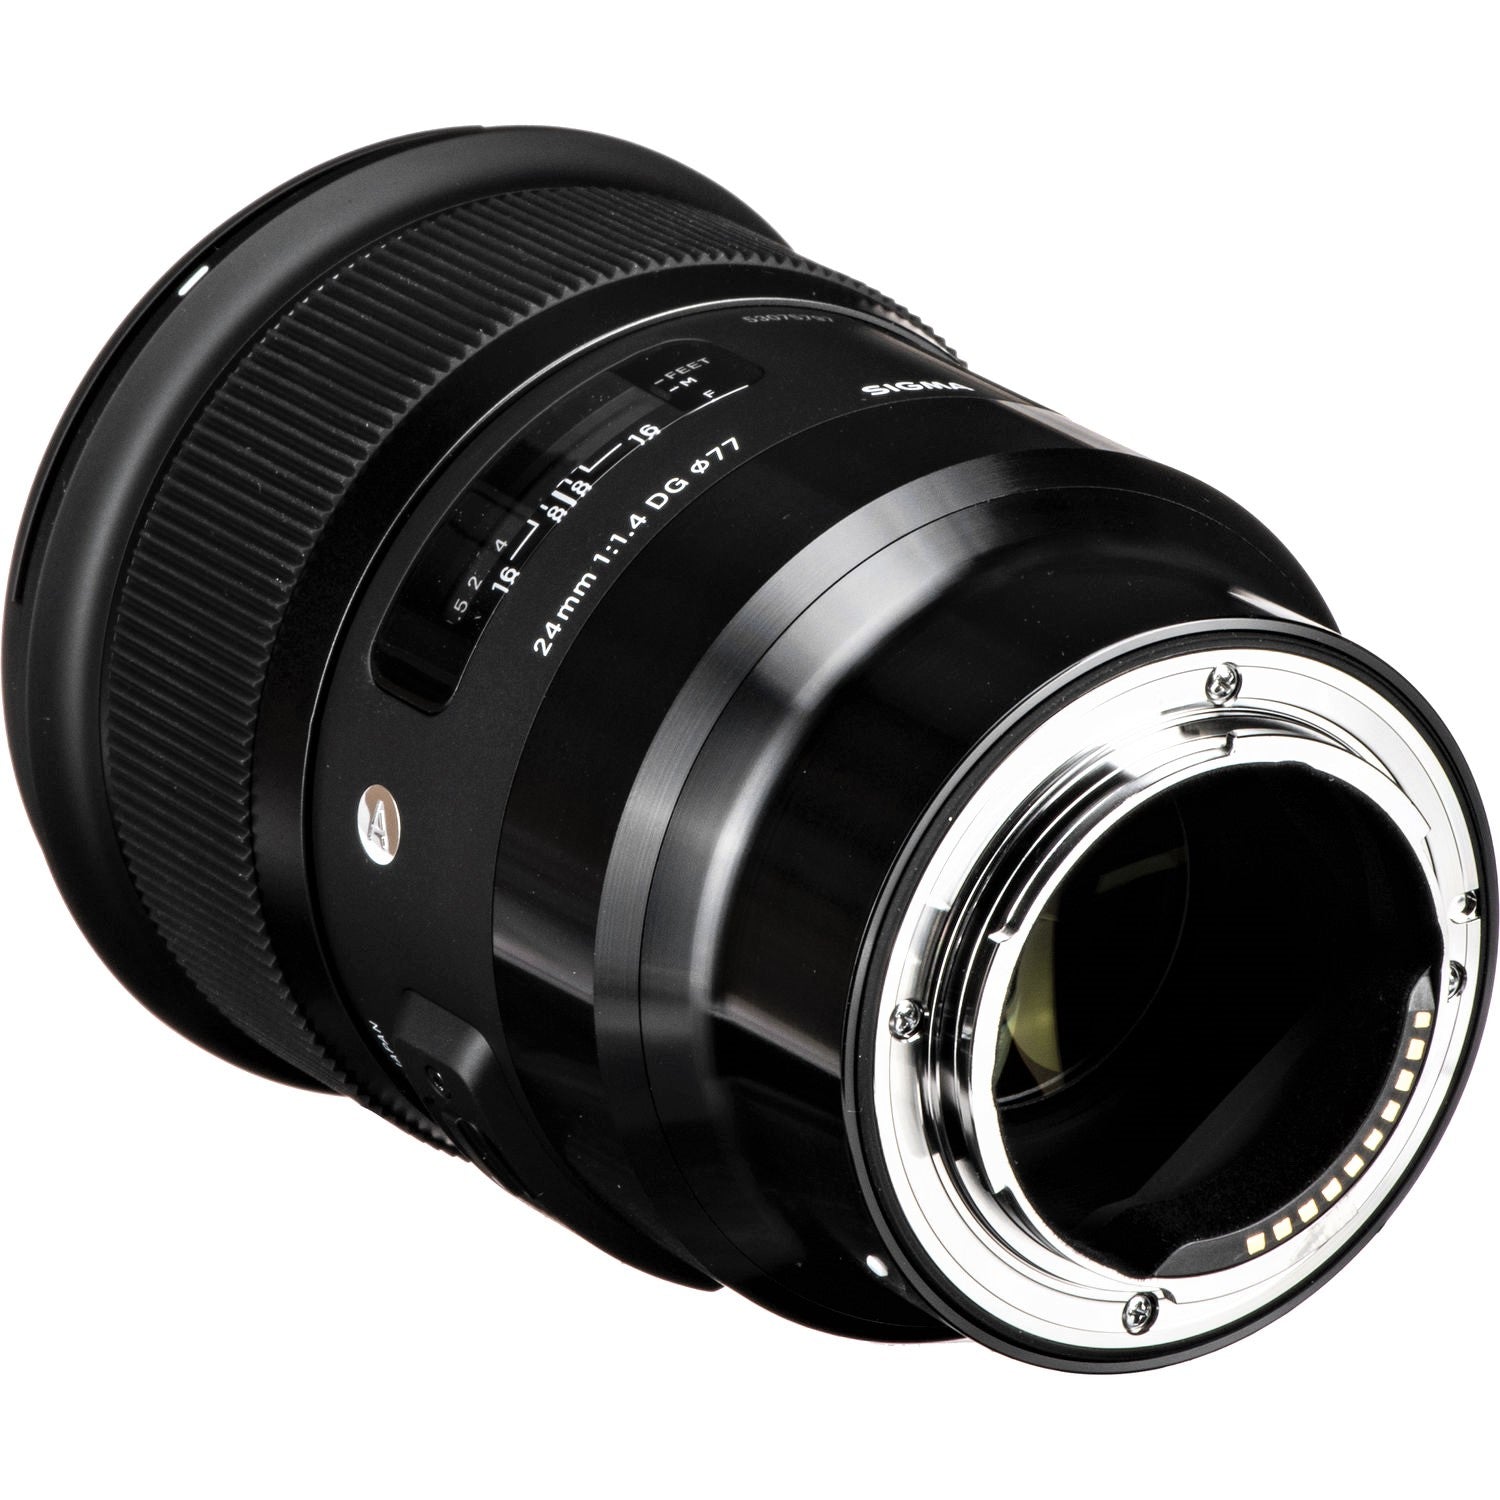 Sigma 24mm F1.4 DG HSM Art Lens for Sony E in a Back-Side View